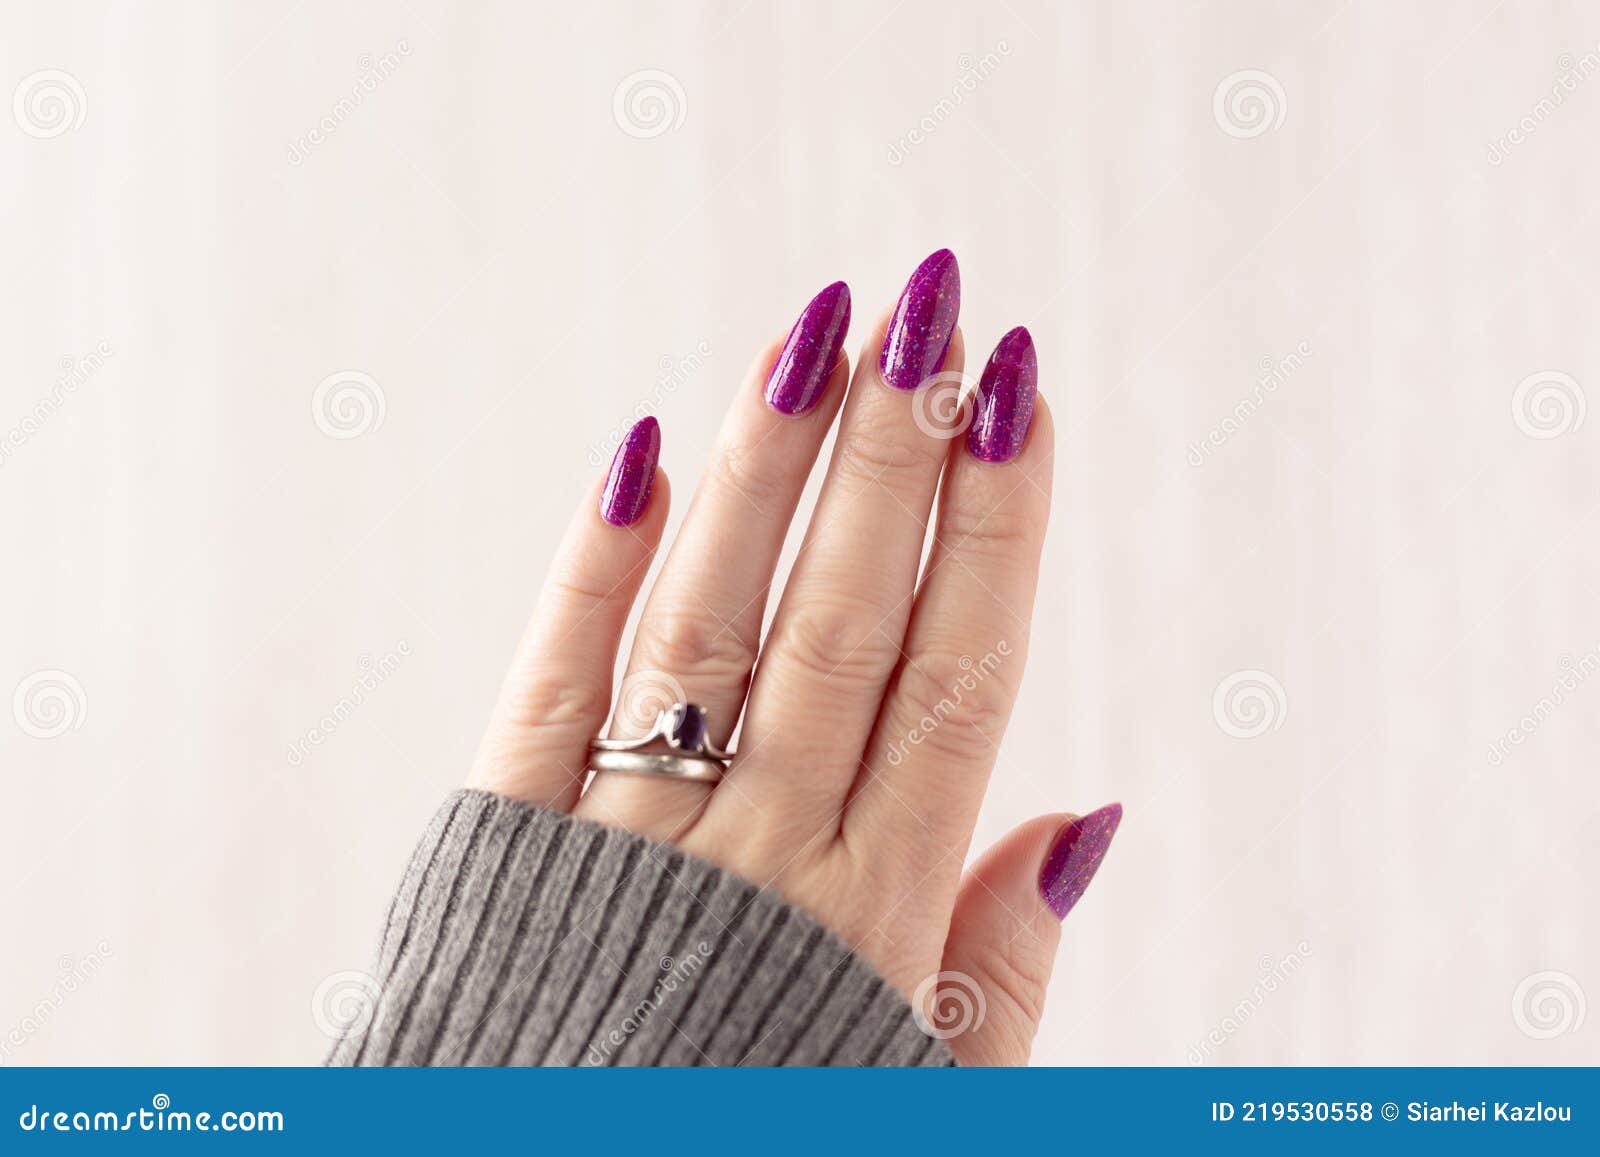 What do long nails say about a woman?